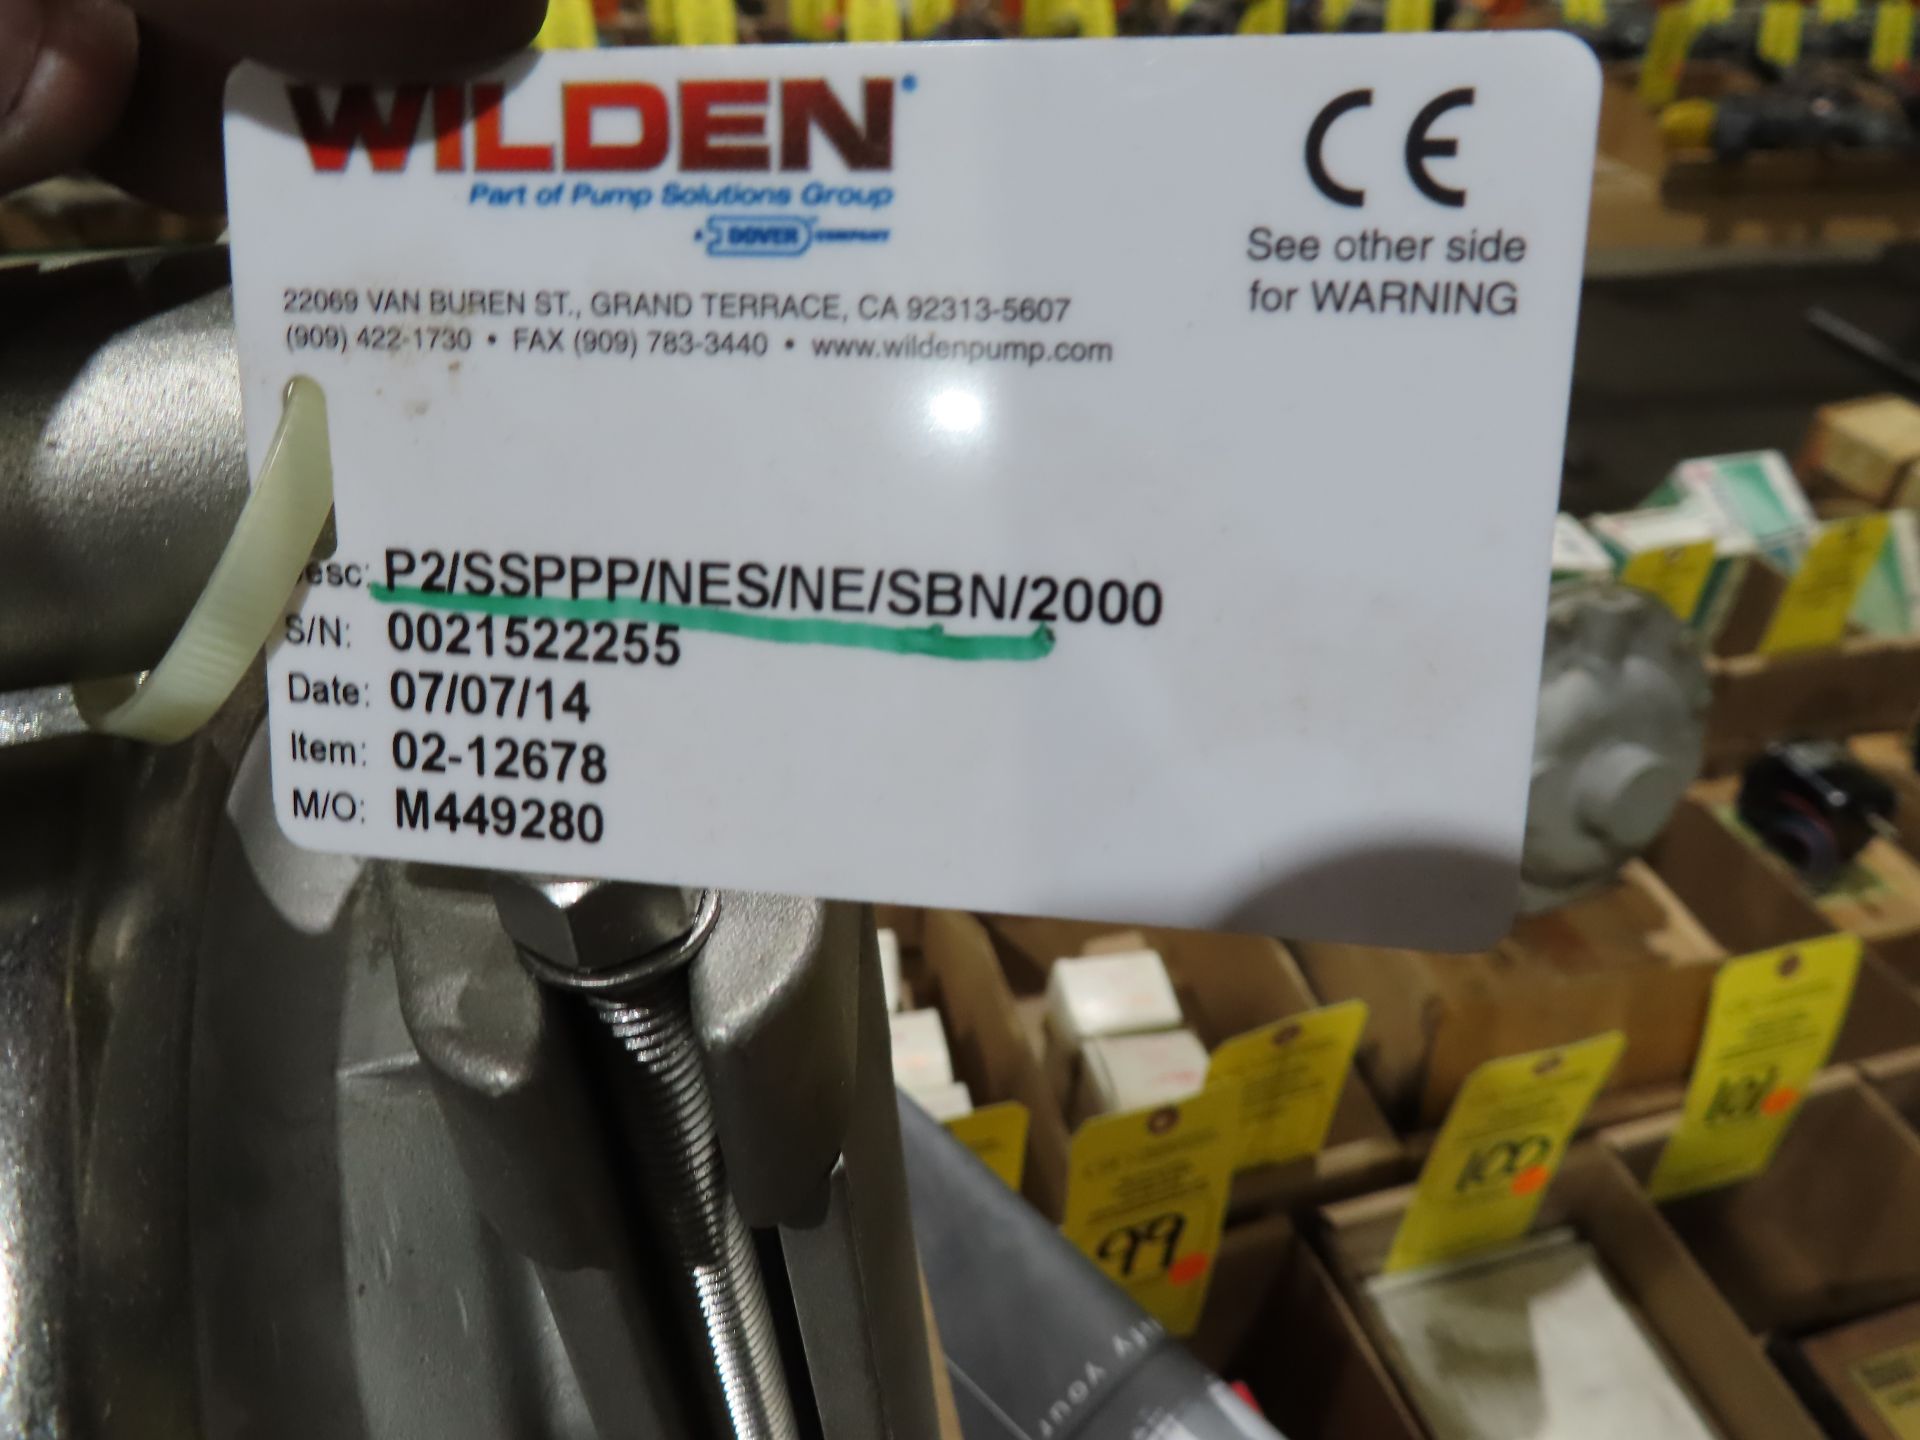 Wilden pump model P2/SSPPP/NEW/NE/SBN/2000, new in box, as always with Brolyn LLC auctions, all lots - Image 2 of 2